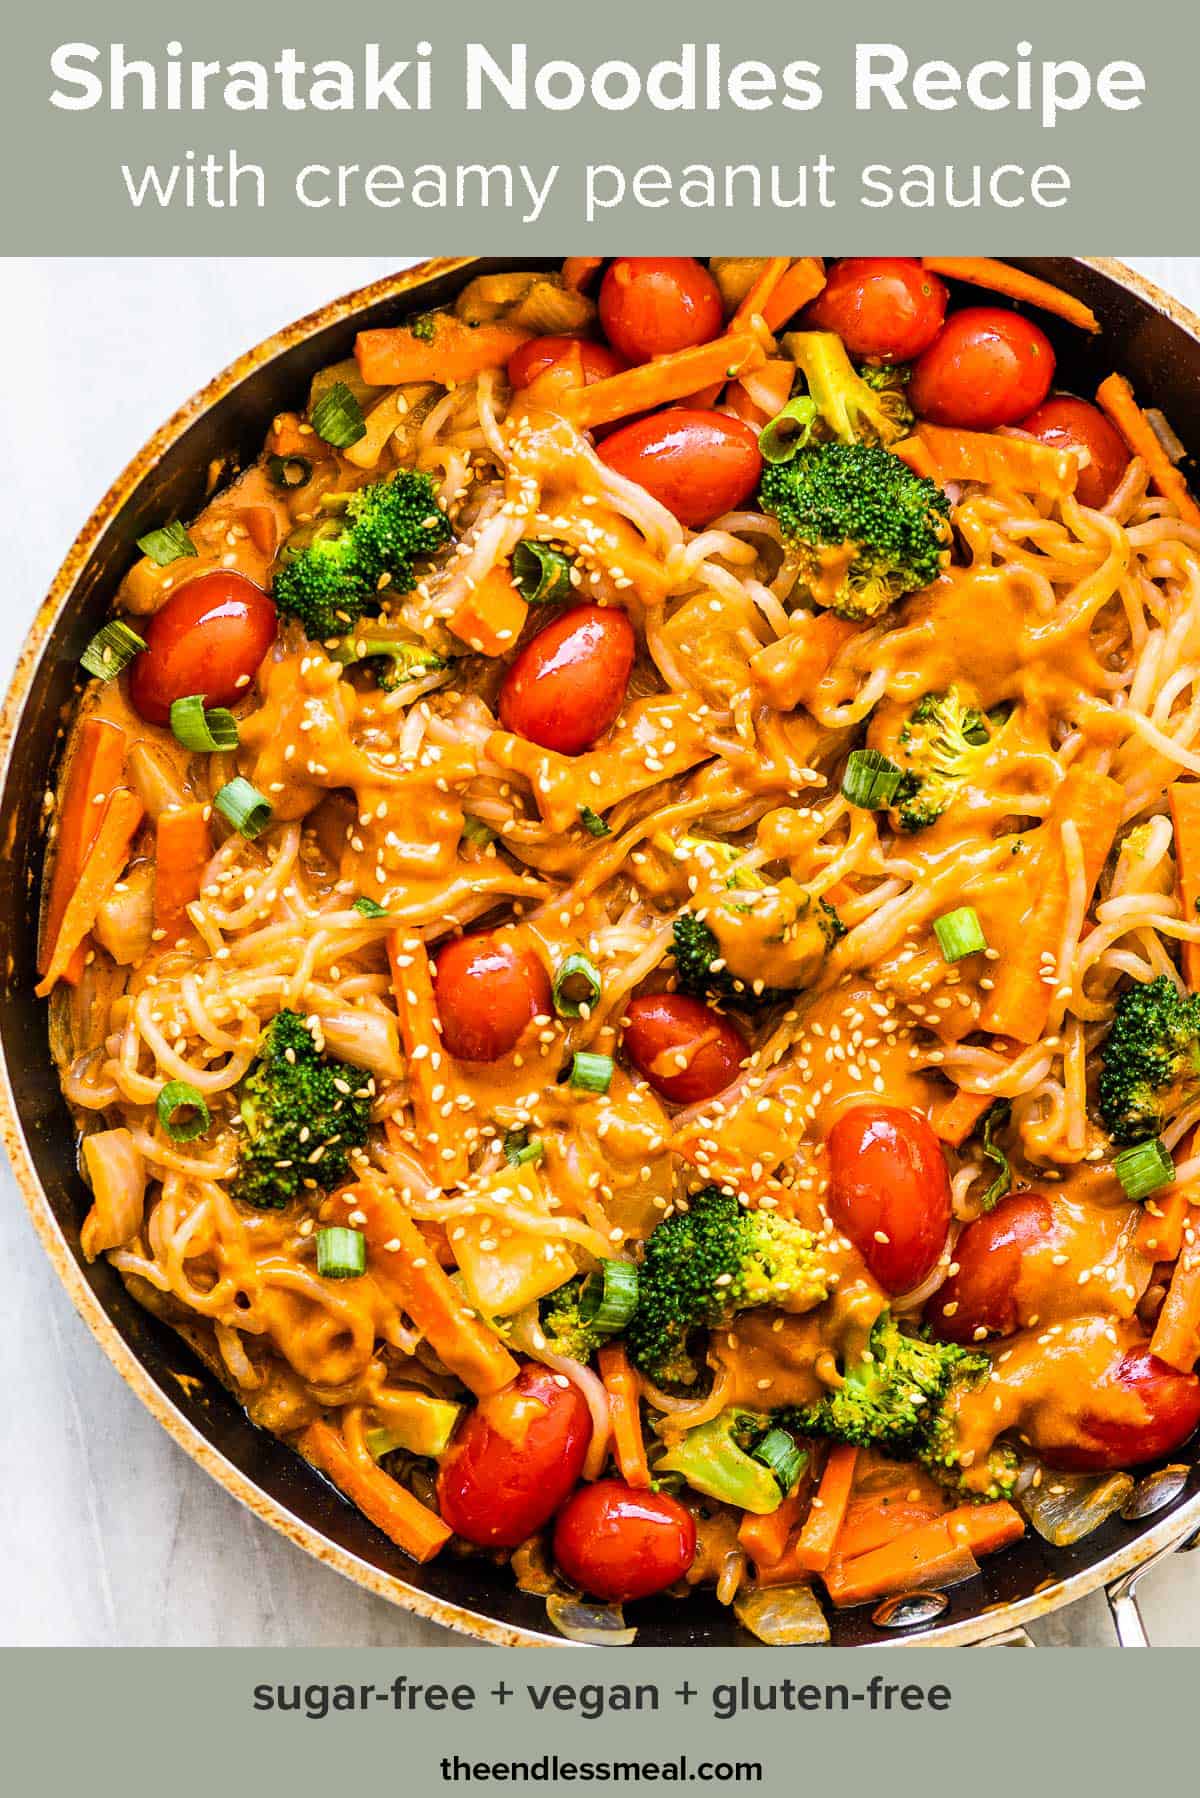 shirataki noodles in a pan with veggies and a peanut sauce with the recipe title on top of the picture.